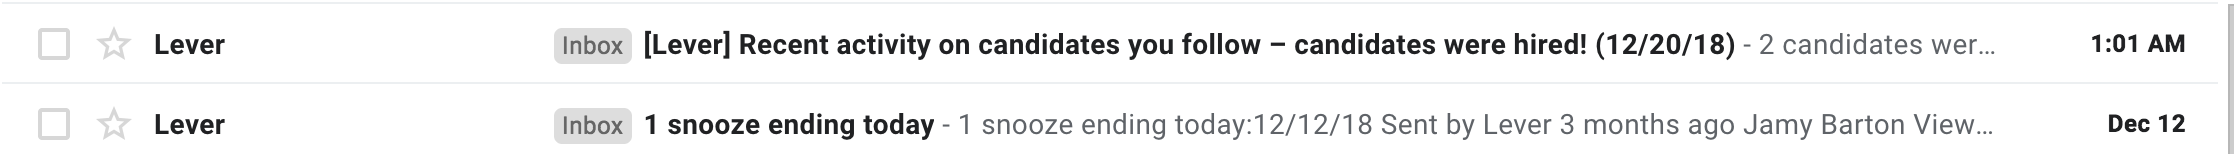 Snooze ending and recent activity reminder emails in Gmail inbox